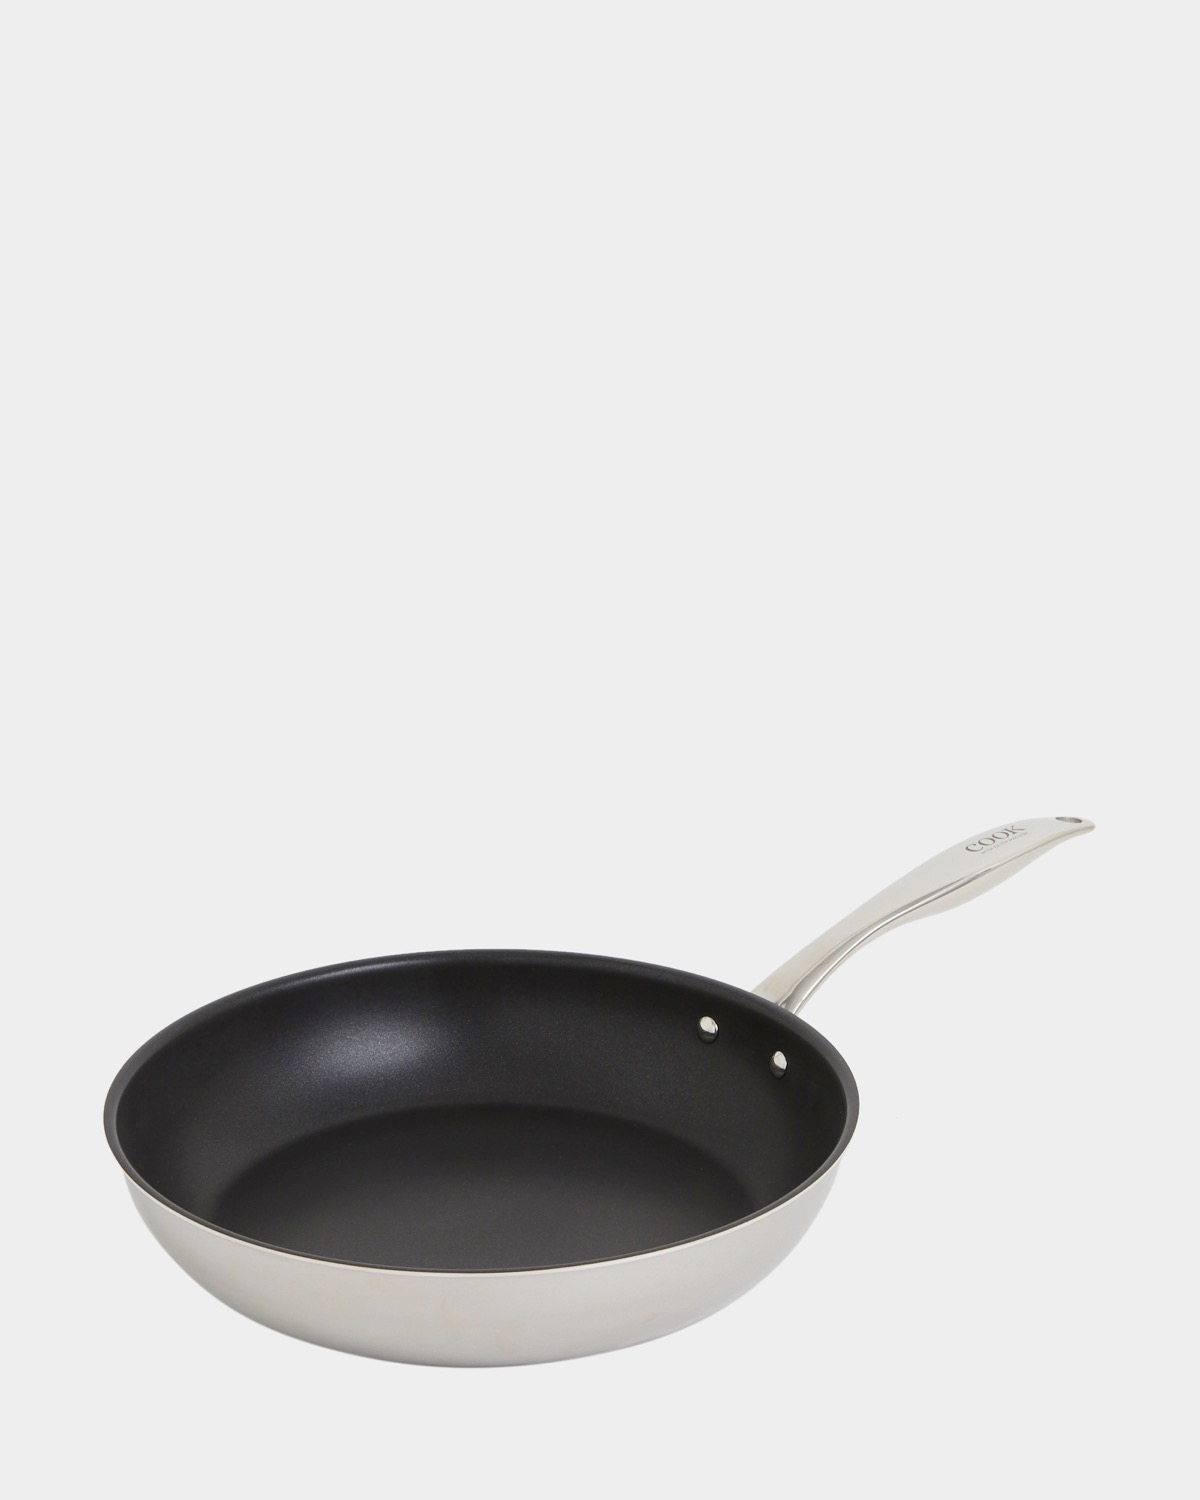 https://dunnes.btxmedia.com/pws/client/images/catalogue/products/5421101/zoom/5421101_sless-steel.jpg